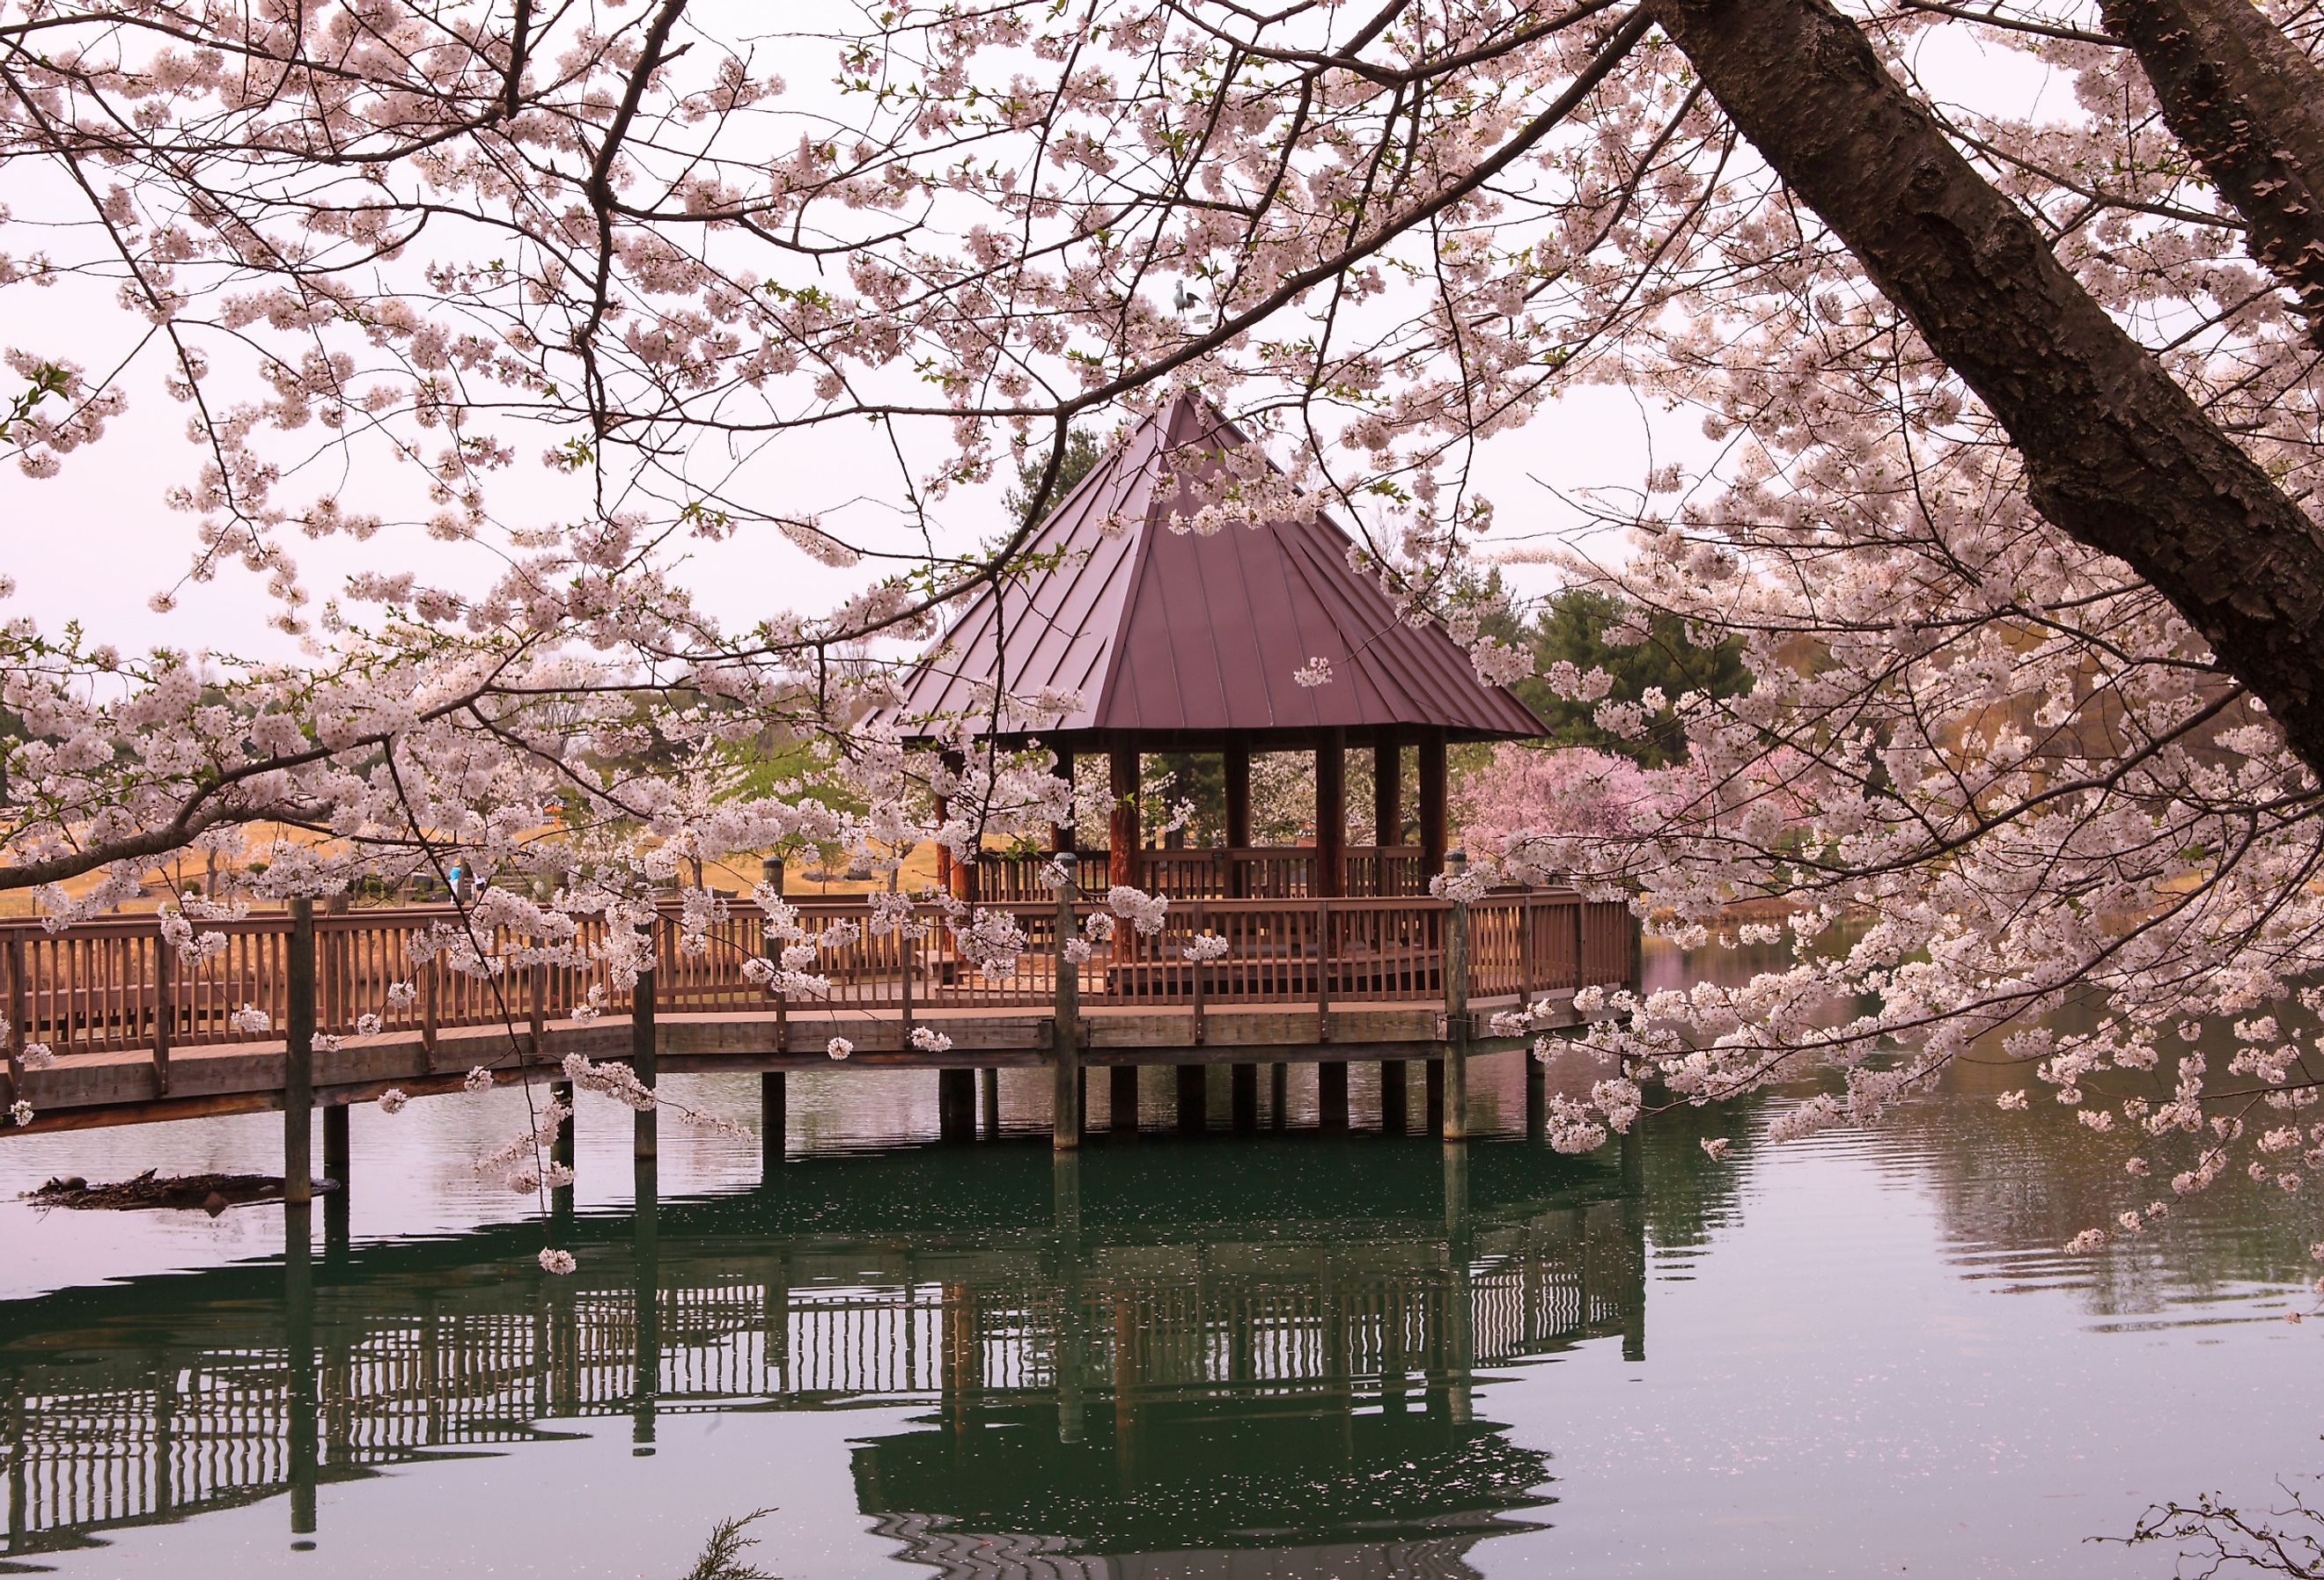 Gazebo on the lake surrounded by cherry blossoms at Meadowlark Botanical Garden, Vienna, Virginia.